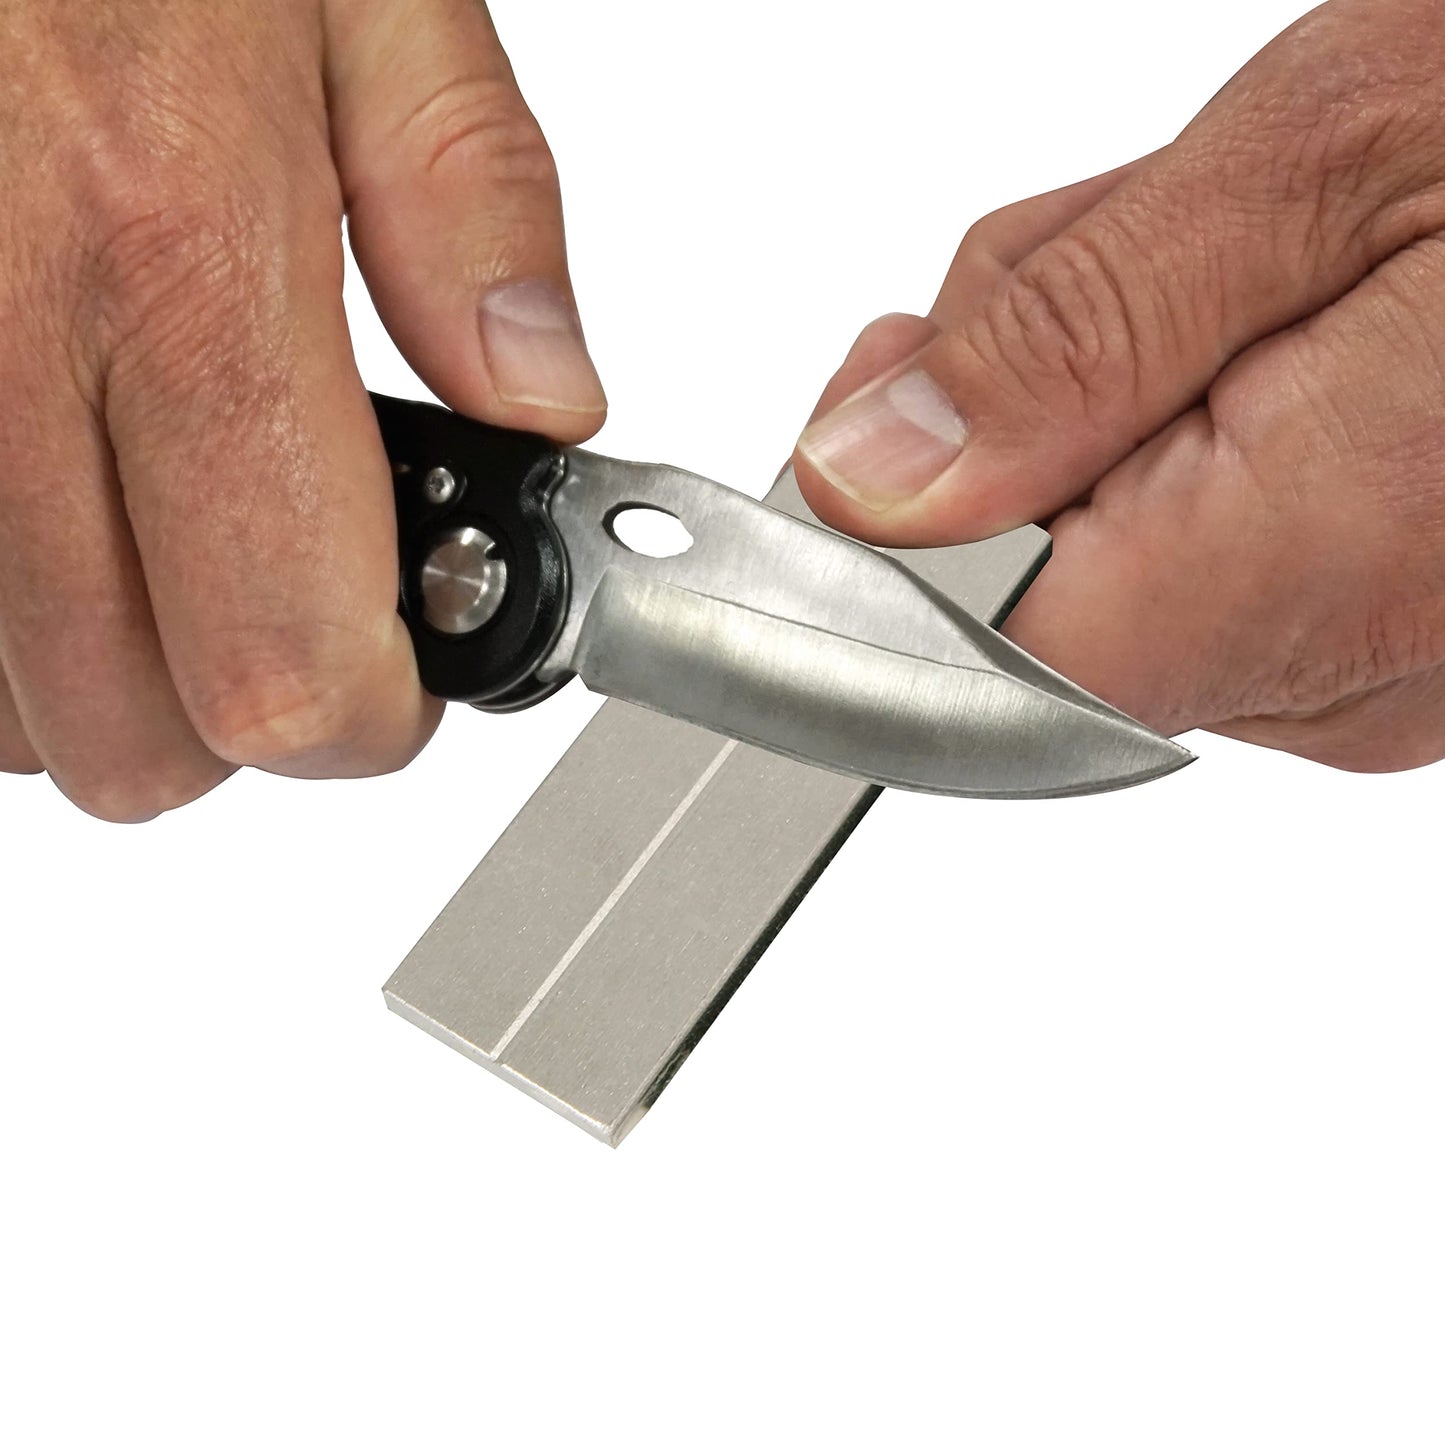 AccuSharp Pocket Size Stone Sharpener for Knives, Tools and More (Diamond)